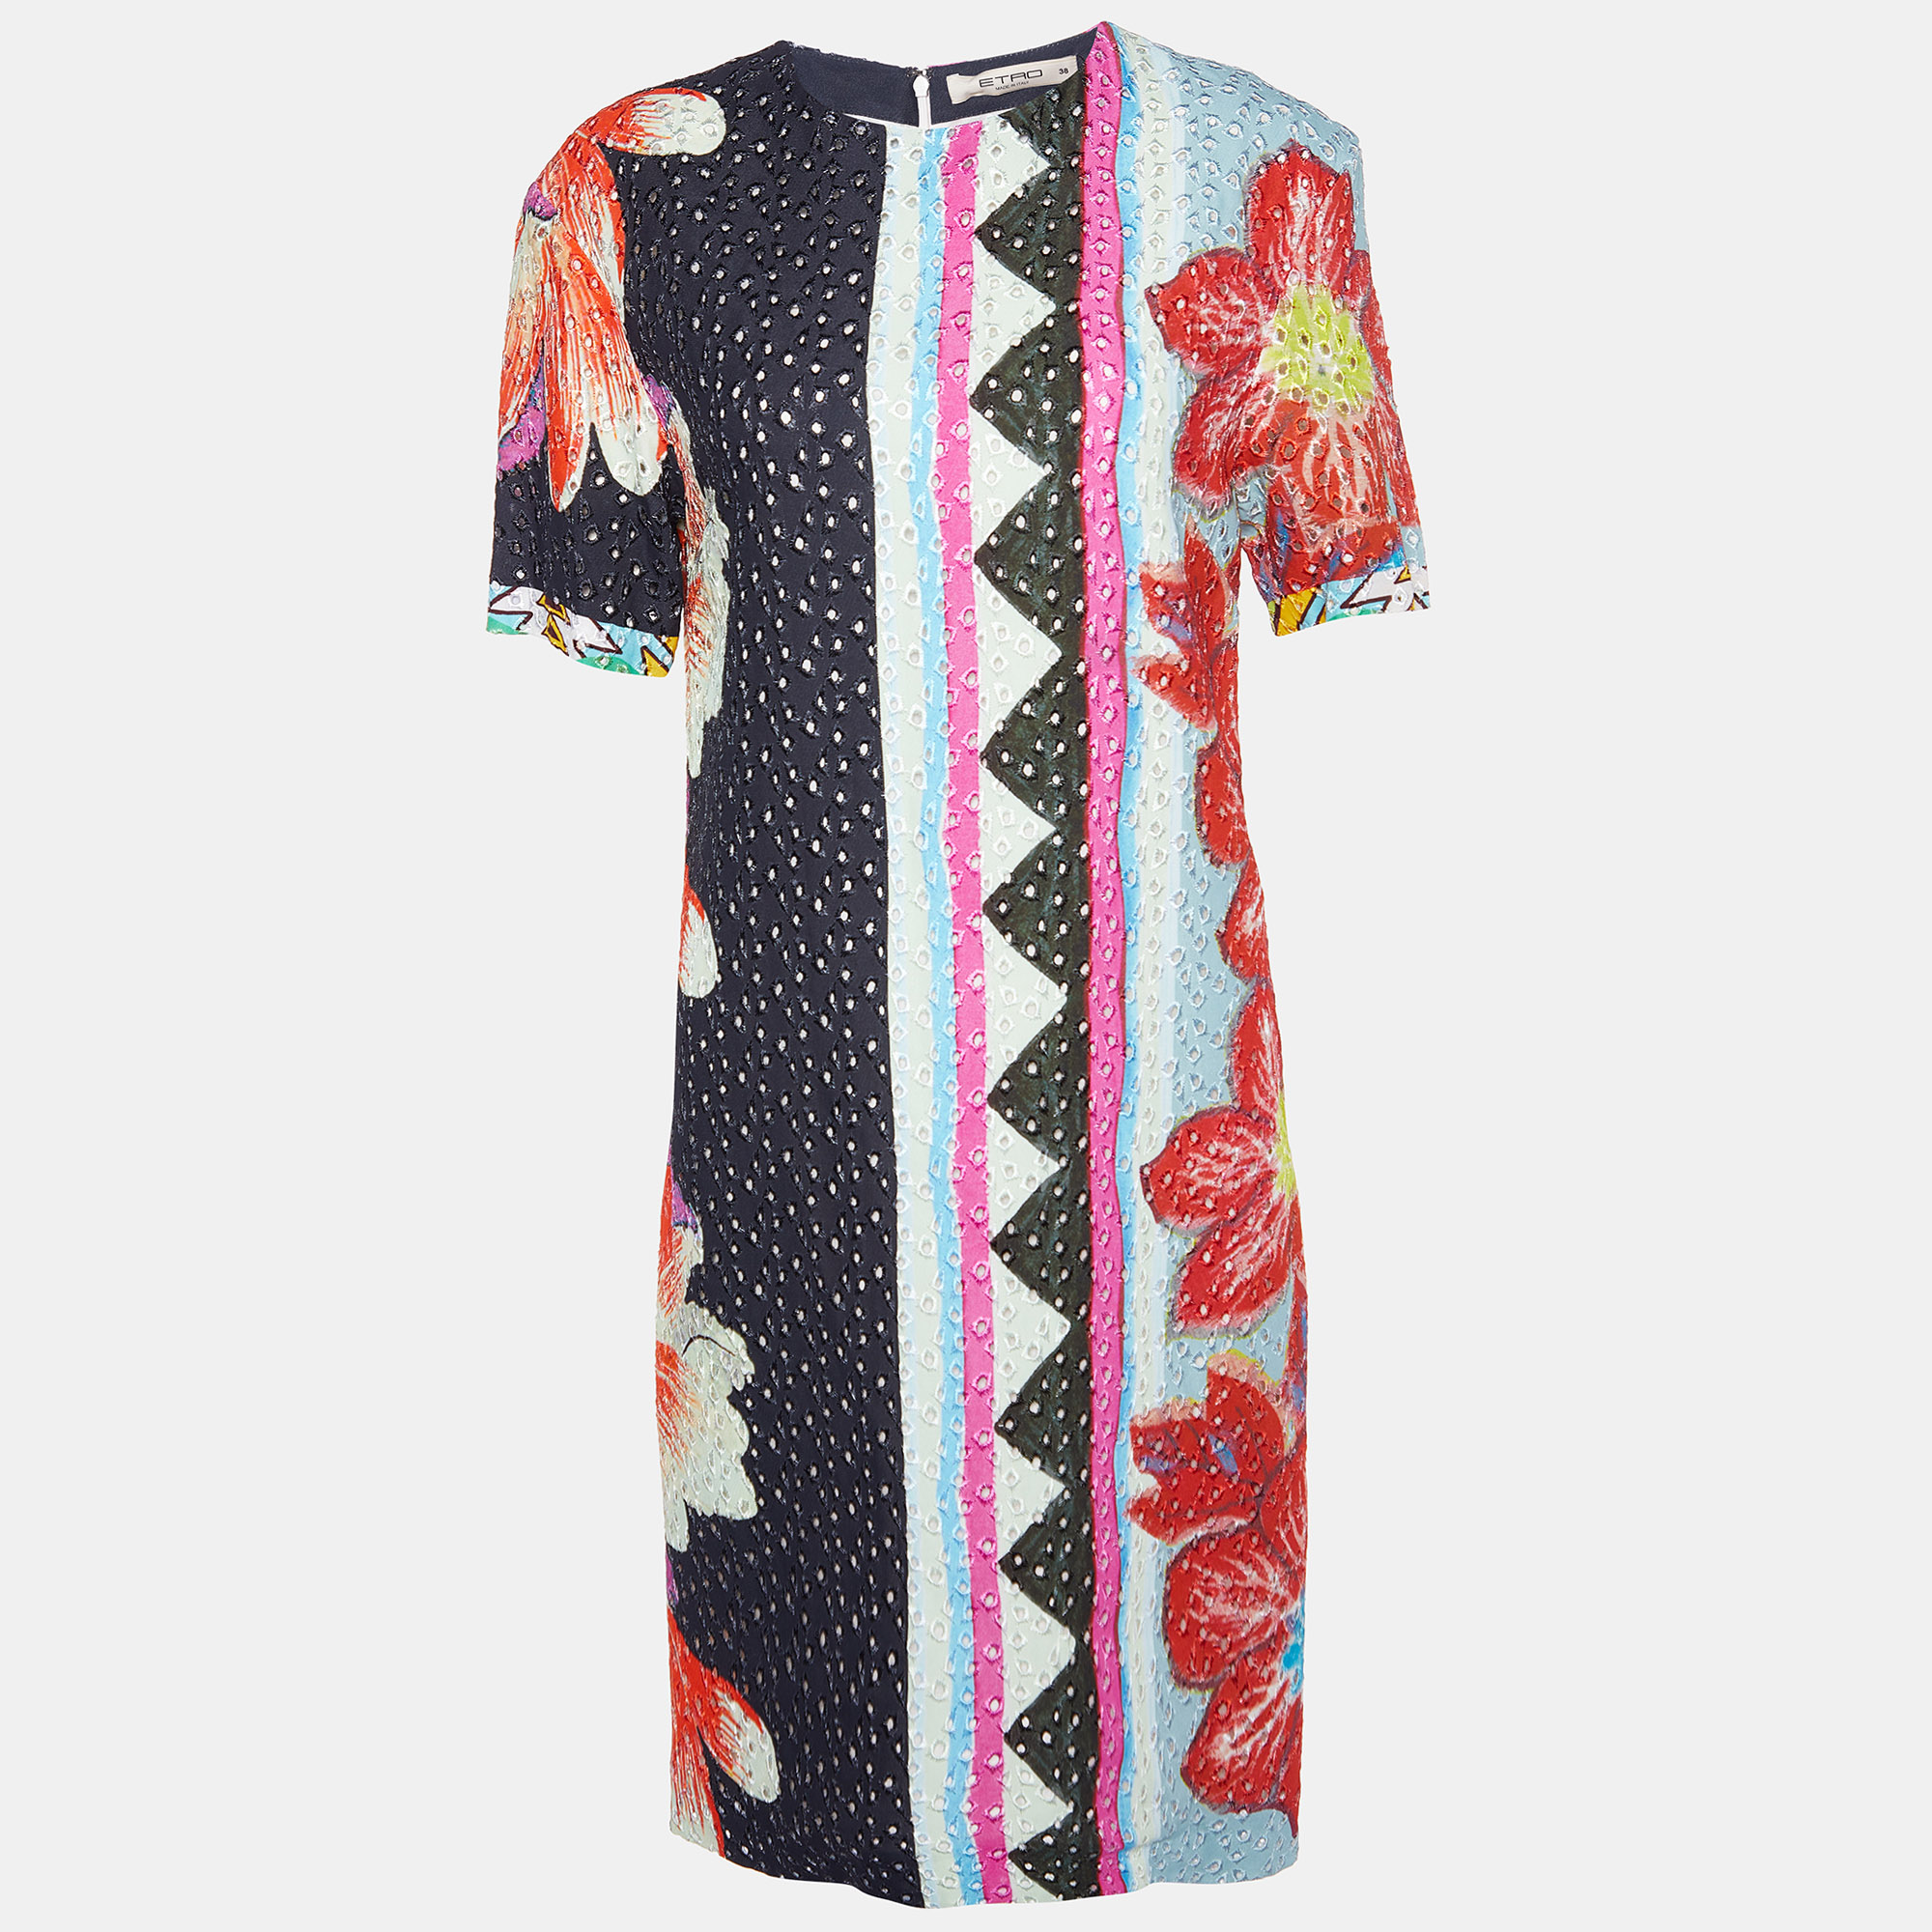 Etro multicolor floral print embroidered crepe shift dress s